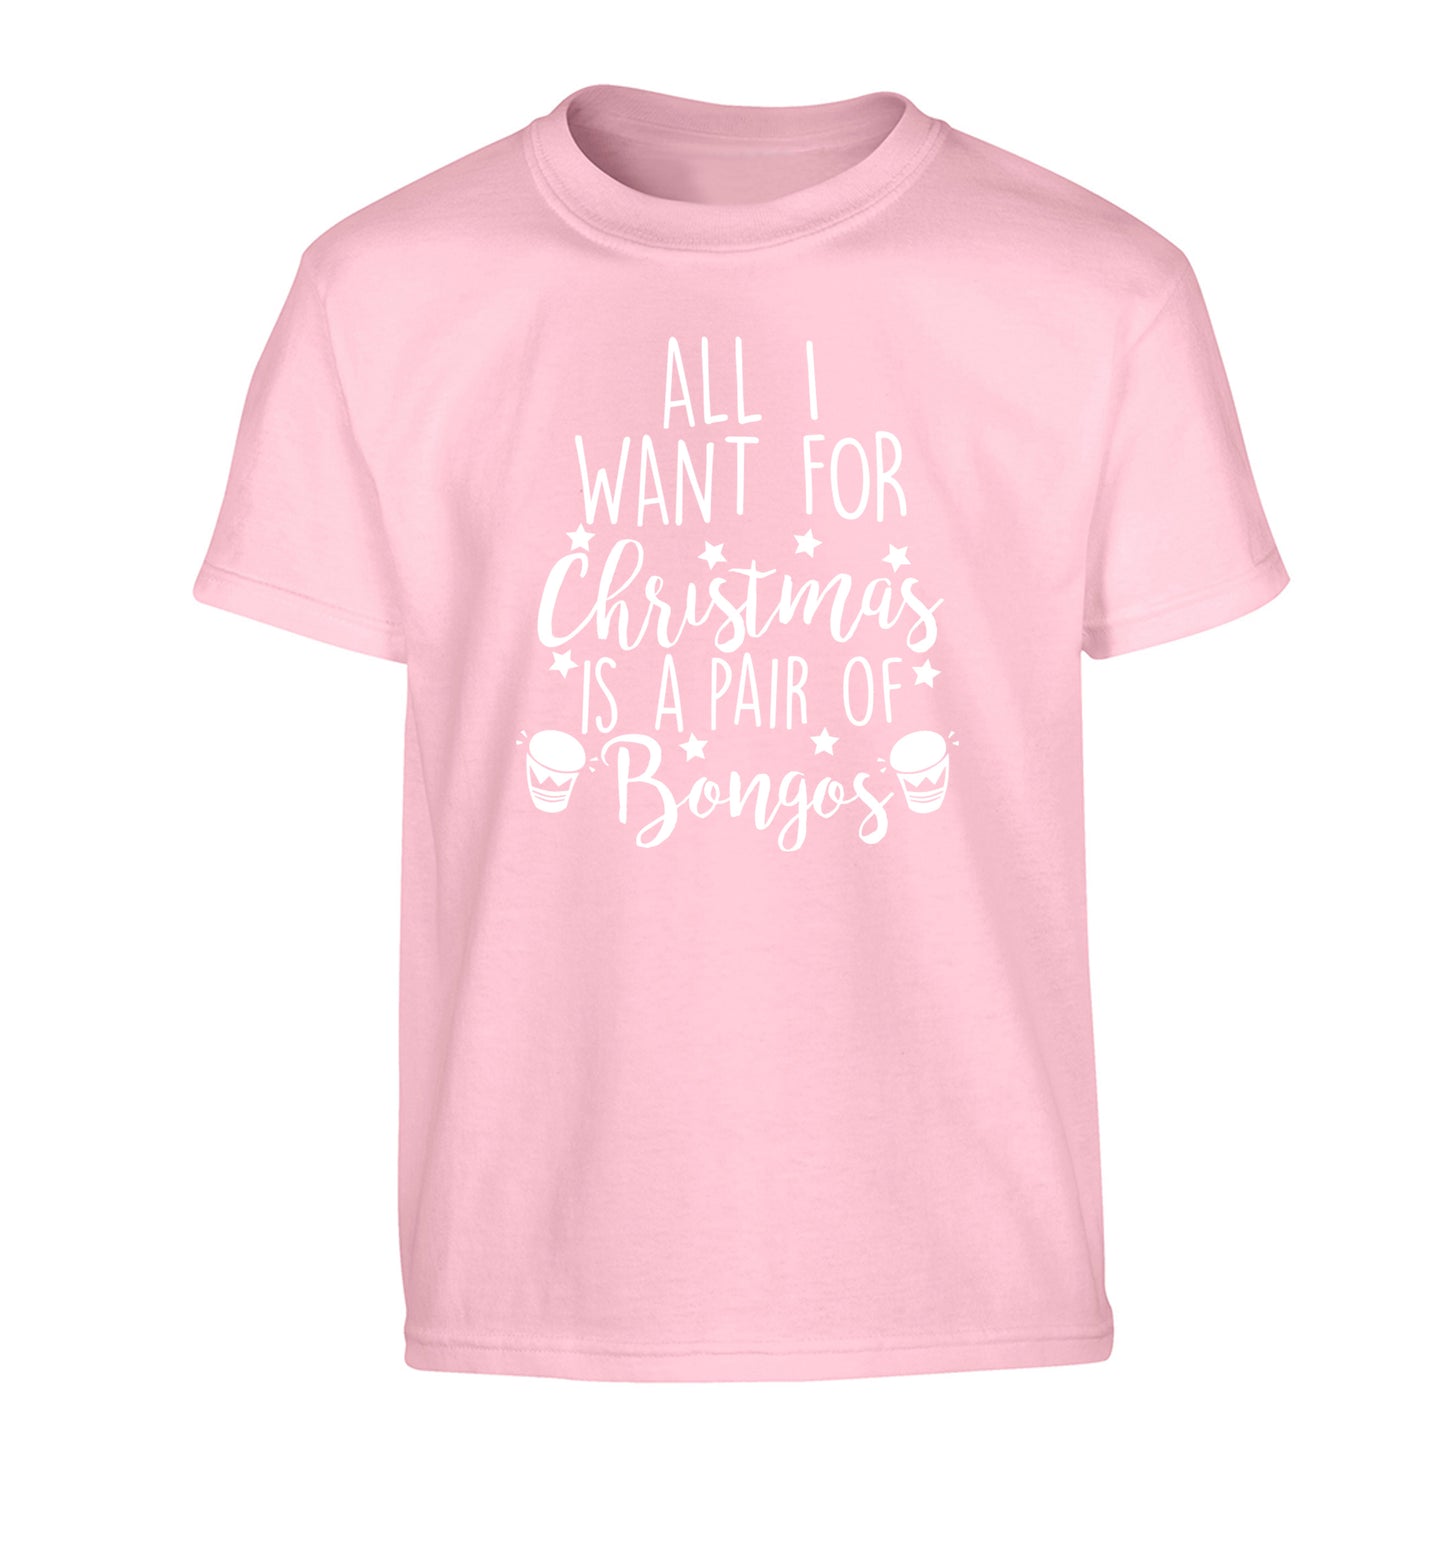 All I want for Christmas is a pair of bongos! Children's light pink Tshirt 12-14 Years